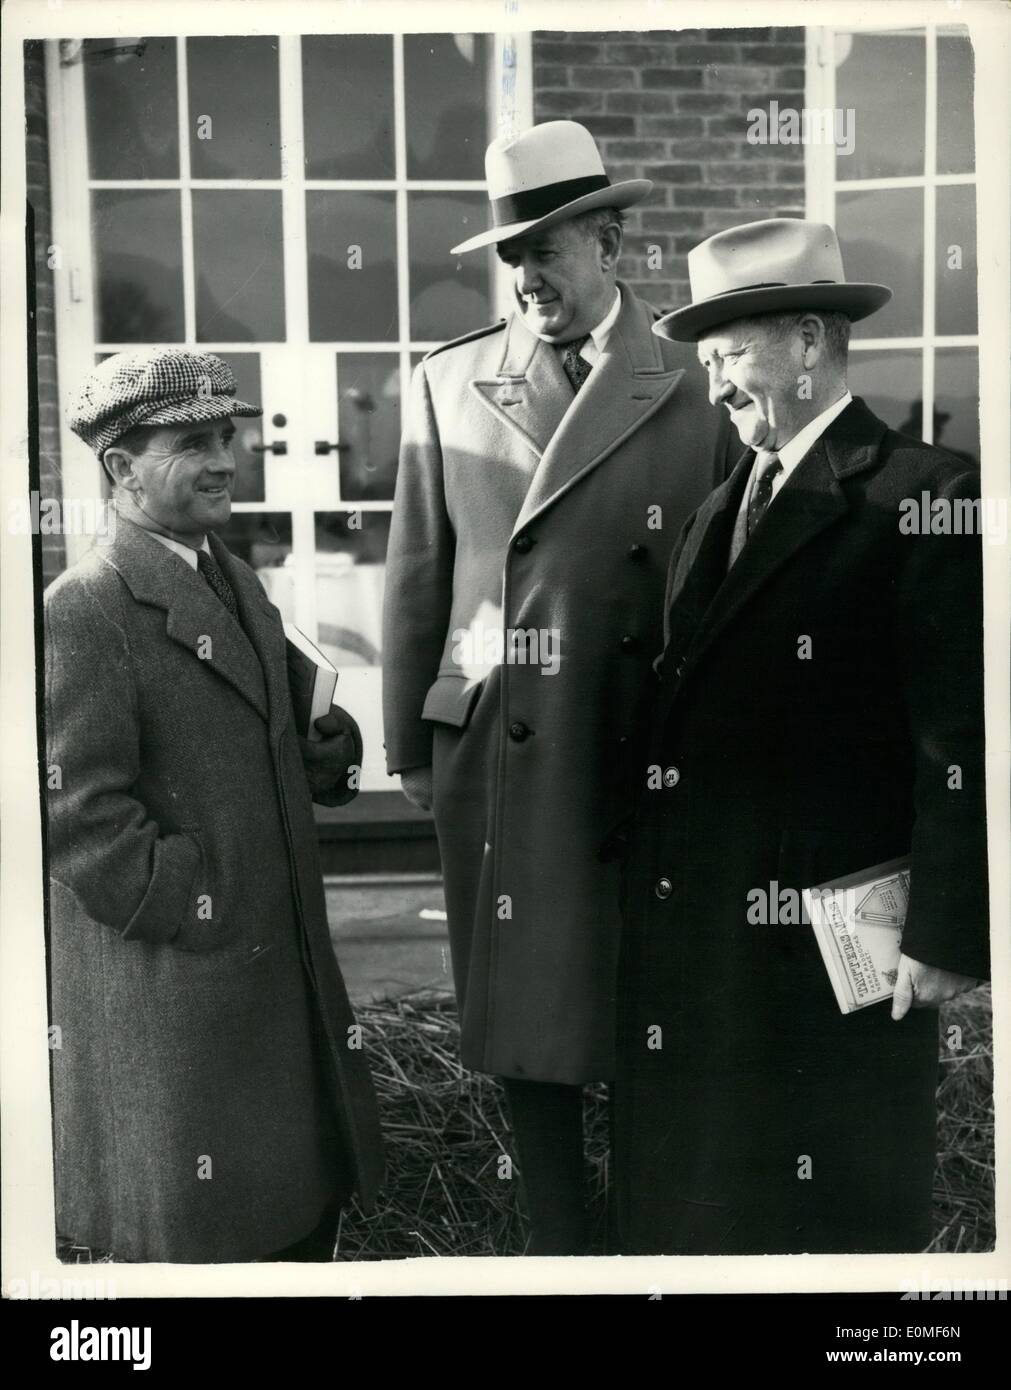 Dec. 12, 1954 - Opening of the Newmarket sales, Sir Gordon with visitors from the United States. A number of record prices were paid at the Newmarket Bloodstock Sales which opened at Newmarket this morning. Keystone Photo Shows: Sir Gordon Richards chatting to (centre) Mr. Joseph T. Donahue of New York, a well known racehorse owner and on right, Mr. James W. Smith also of New York, an ex-jockey and trainer at the sales today. JSS/Keystone Stock Photo